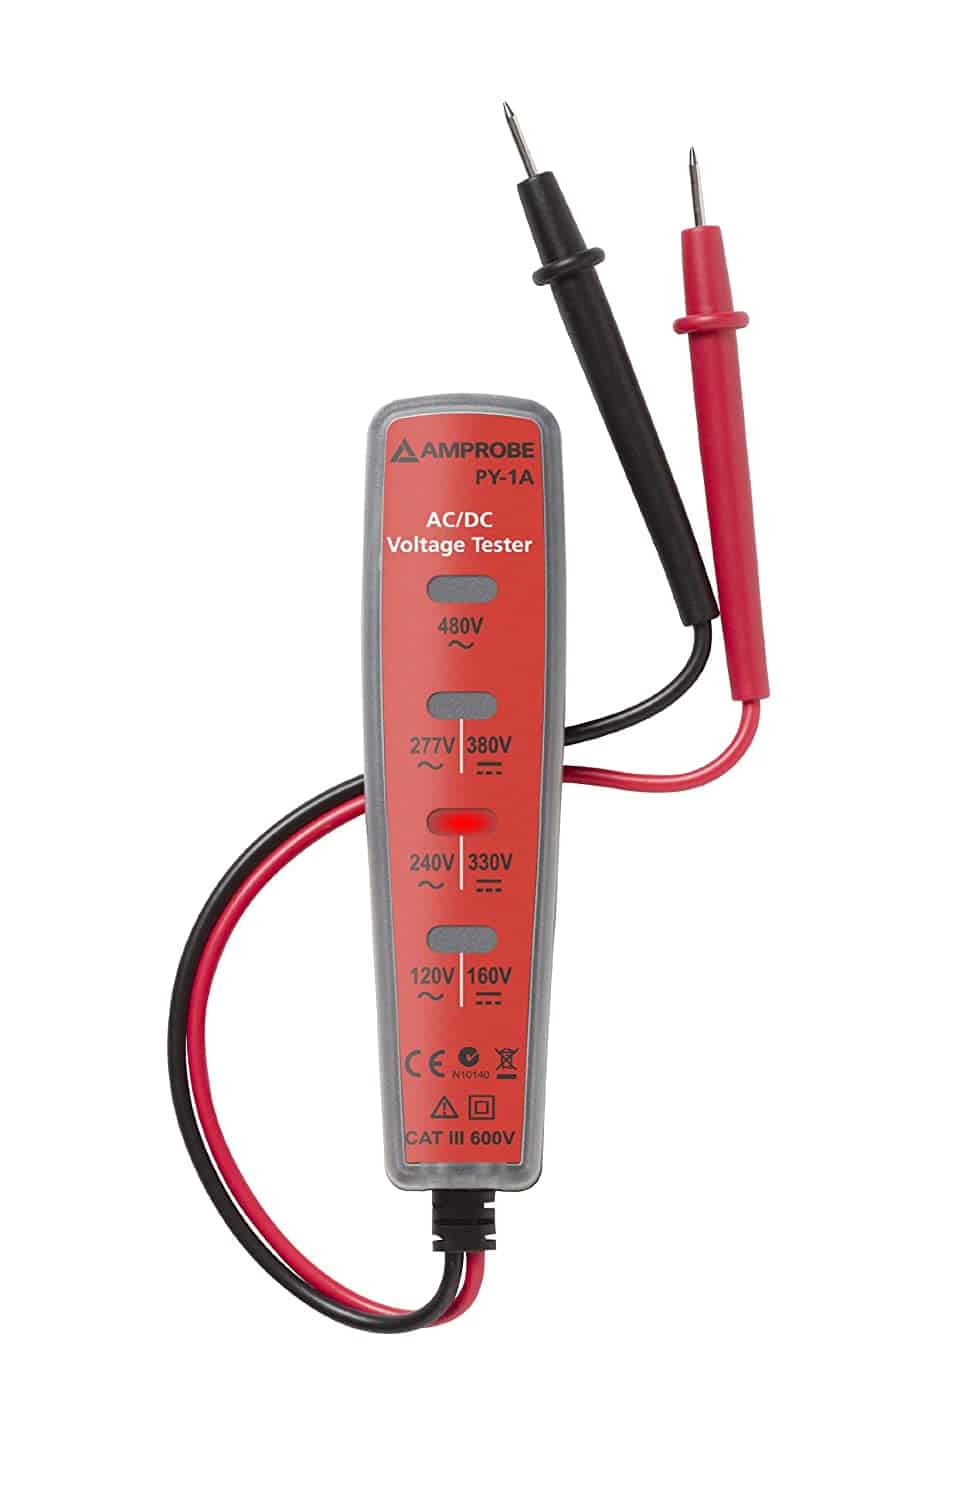 Best voltage tester for working in tight spaces: Amprobe PY-1A Voltage Tester